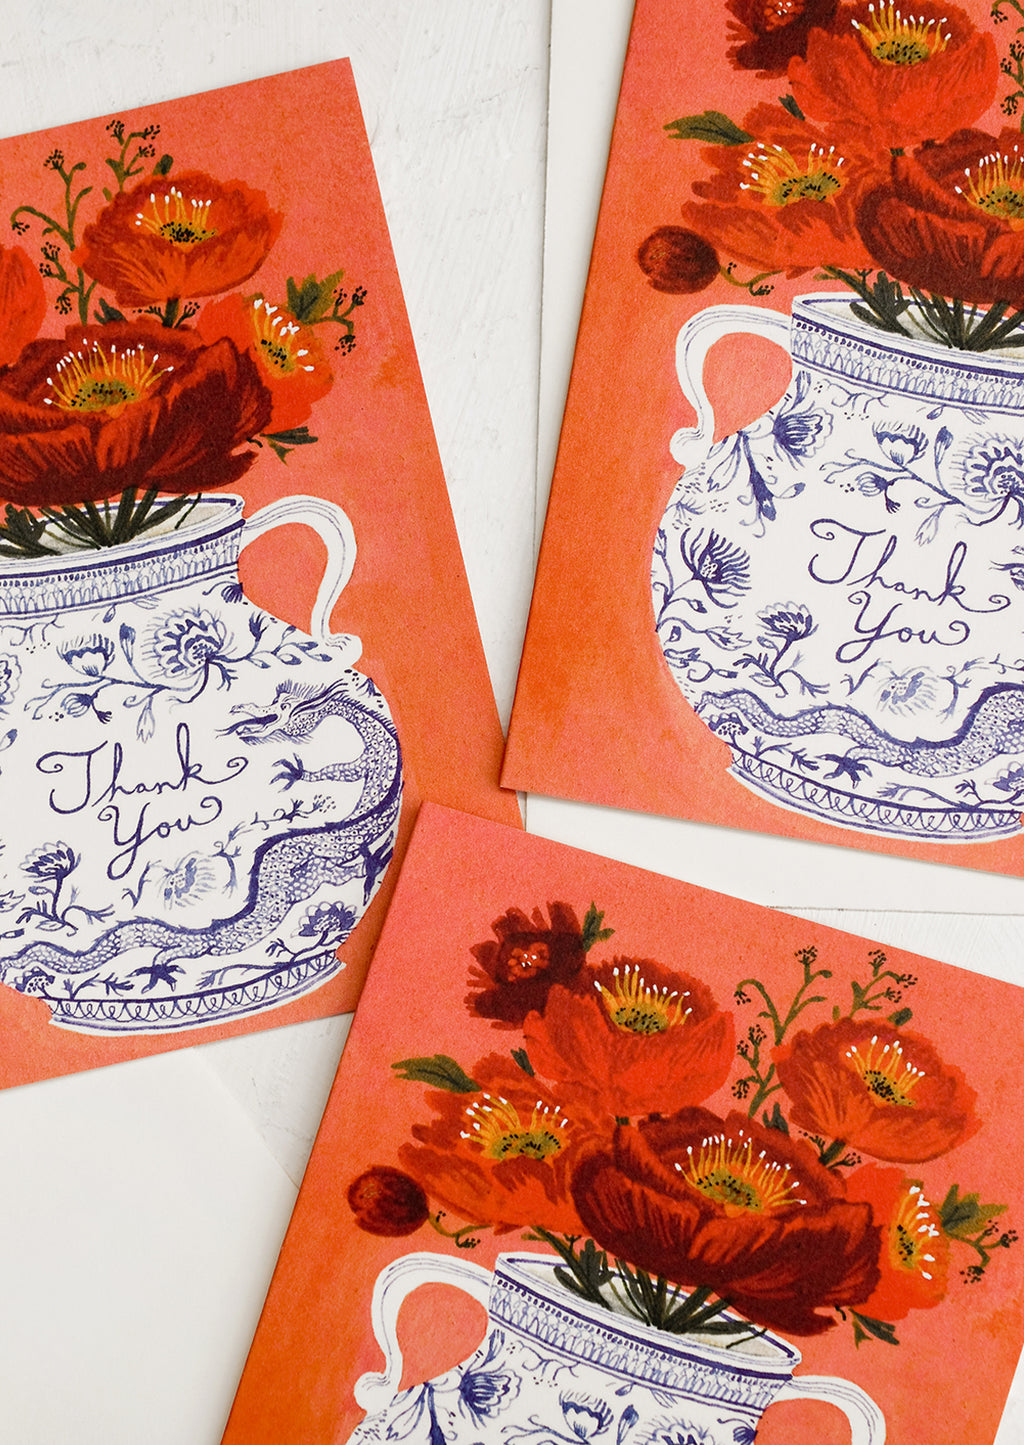 Boxed Set of 8: Greeting cards with chinoiserie vase holding flowers, text reads "Thank you".